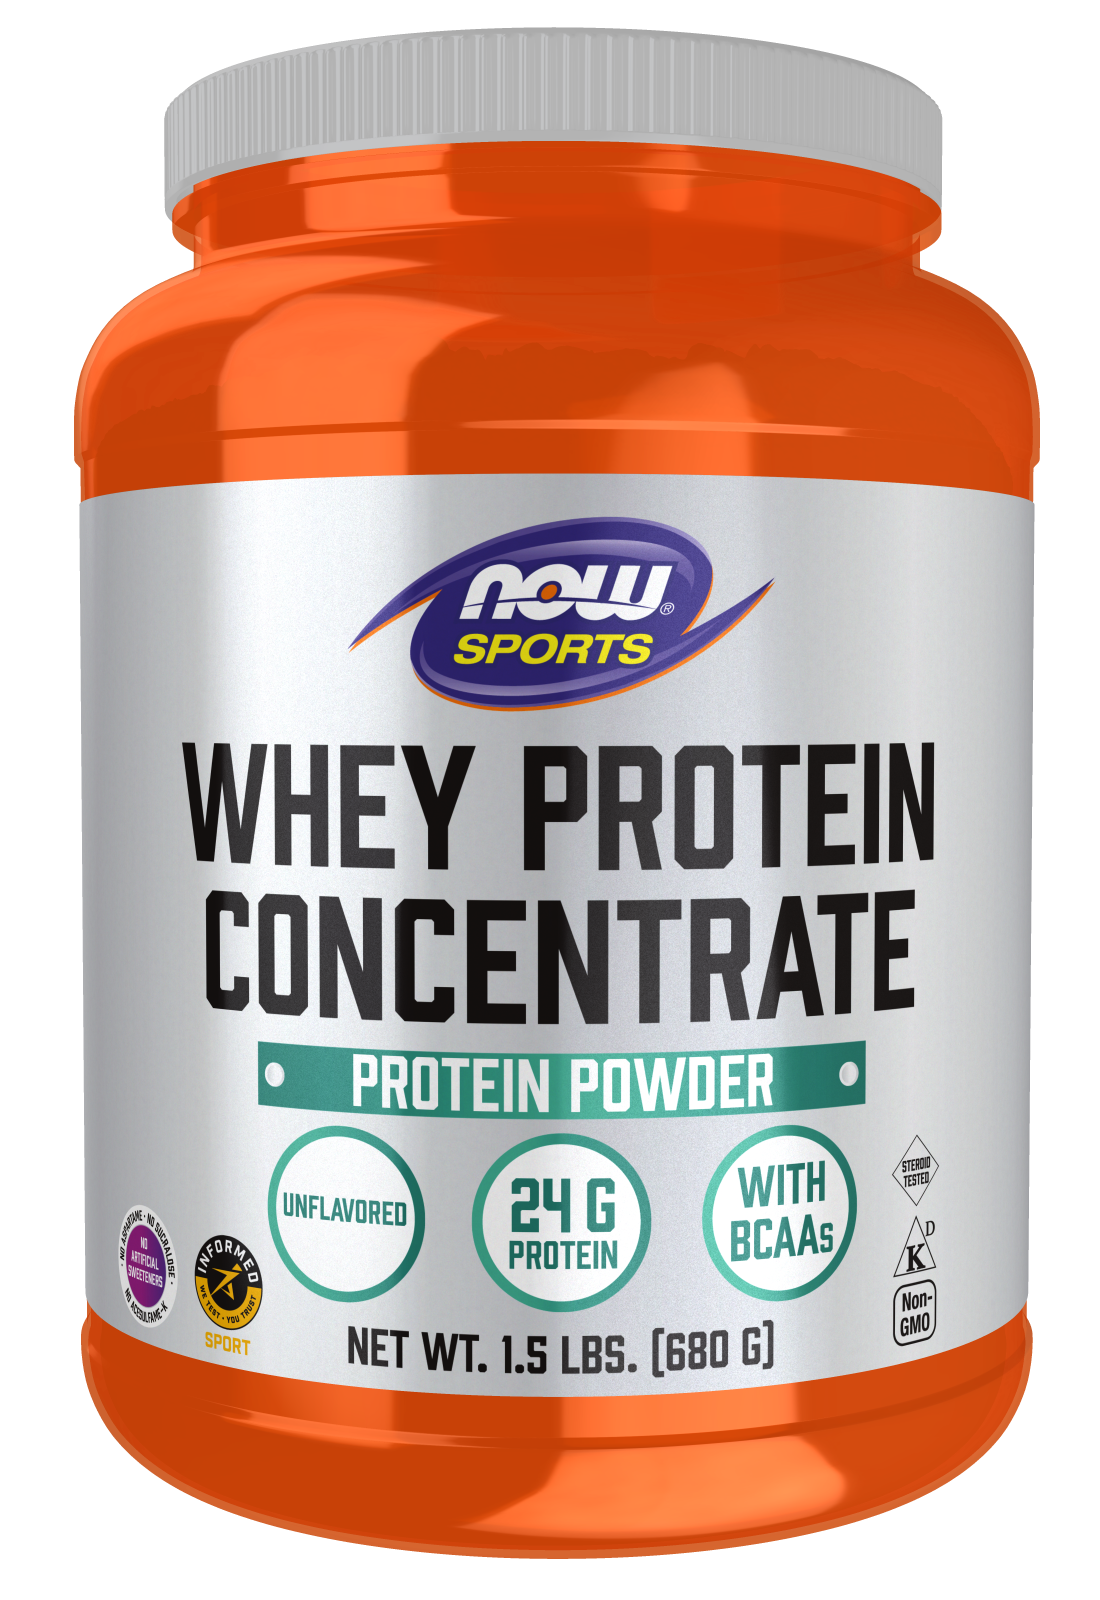 Whey Protein Concentrate Unflavored - 1.5 lbs. Bottle Front